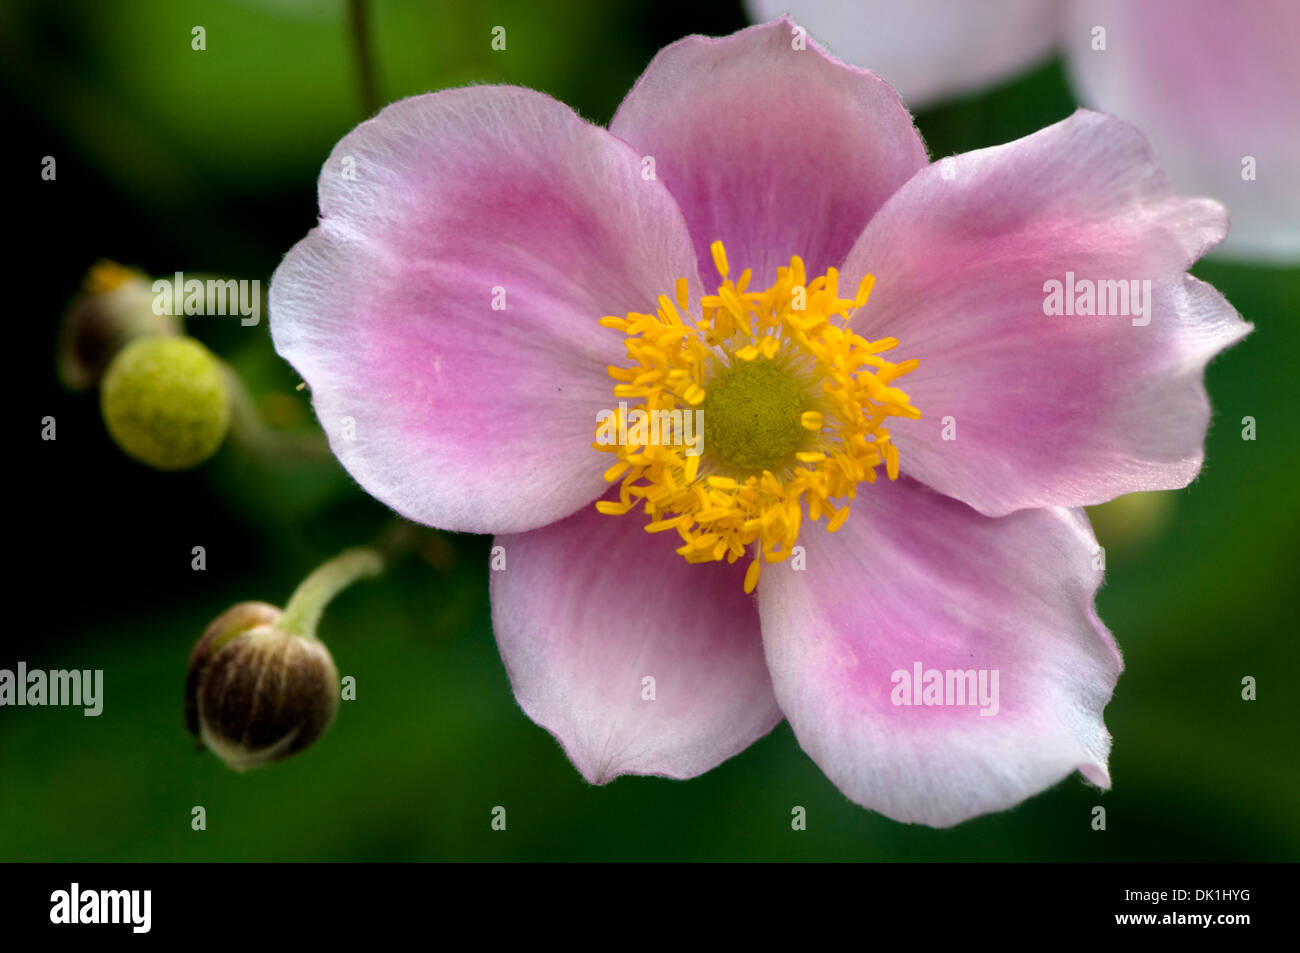 Macro image of a Japanese anemone flower, close-up with its' pink and white delicate petals and pollen filled yellow center. Stock Photo